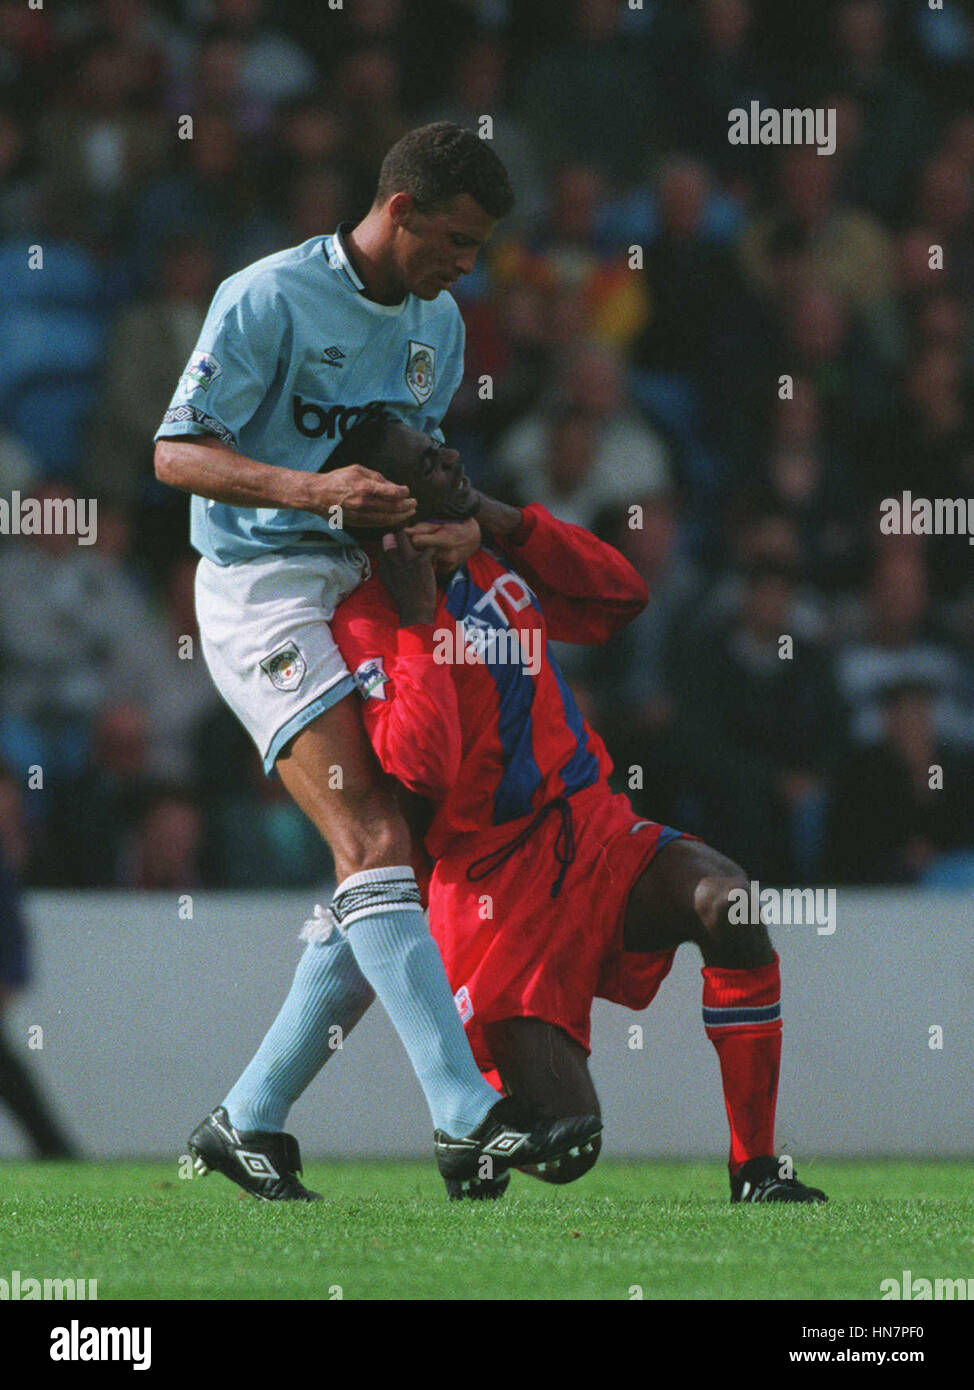 SOMEBODY SHOULD TELL KEITH ITS FOOTBALL NOT THE W.W.F. 10 September 1994 Stock Photo